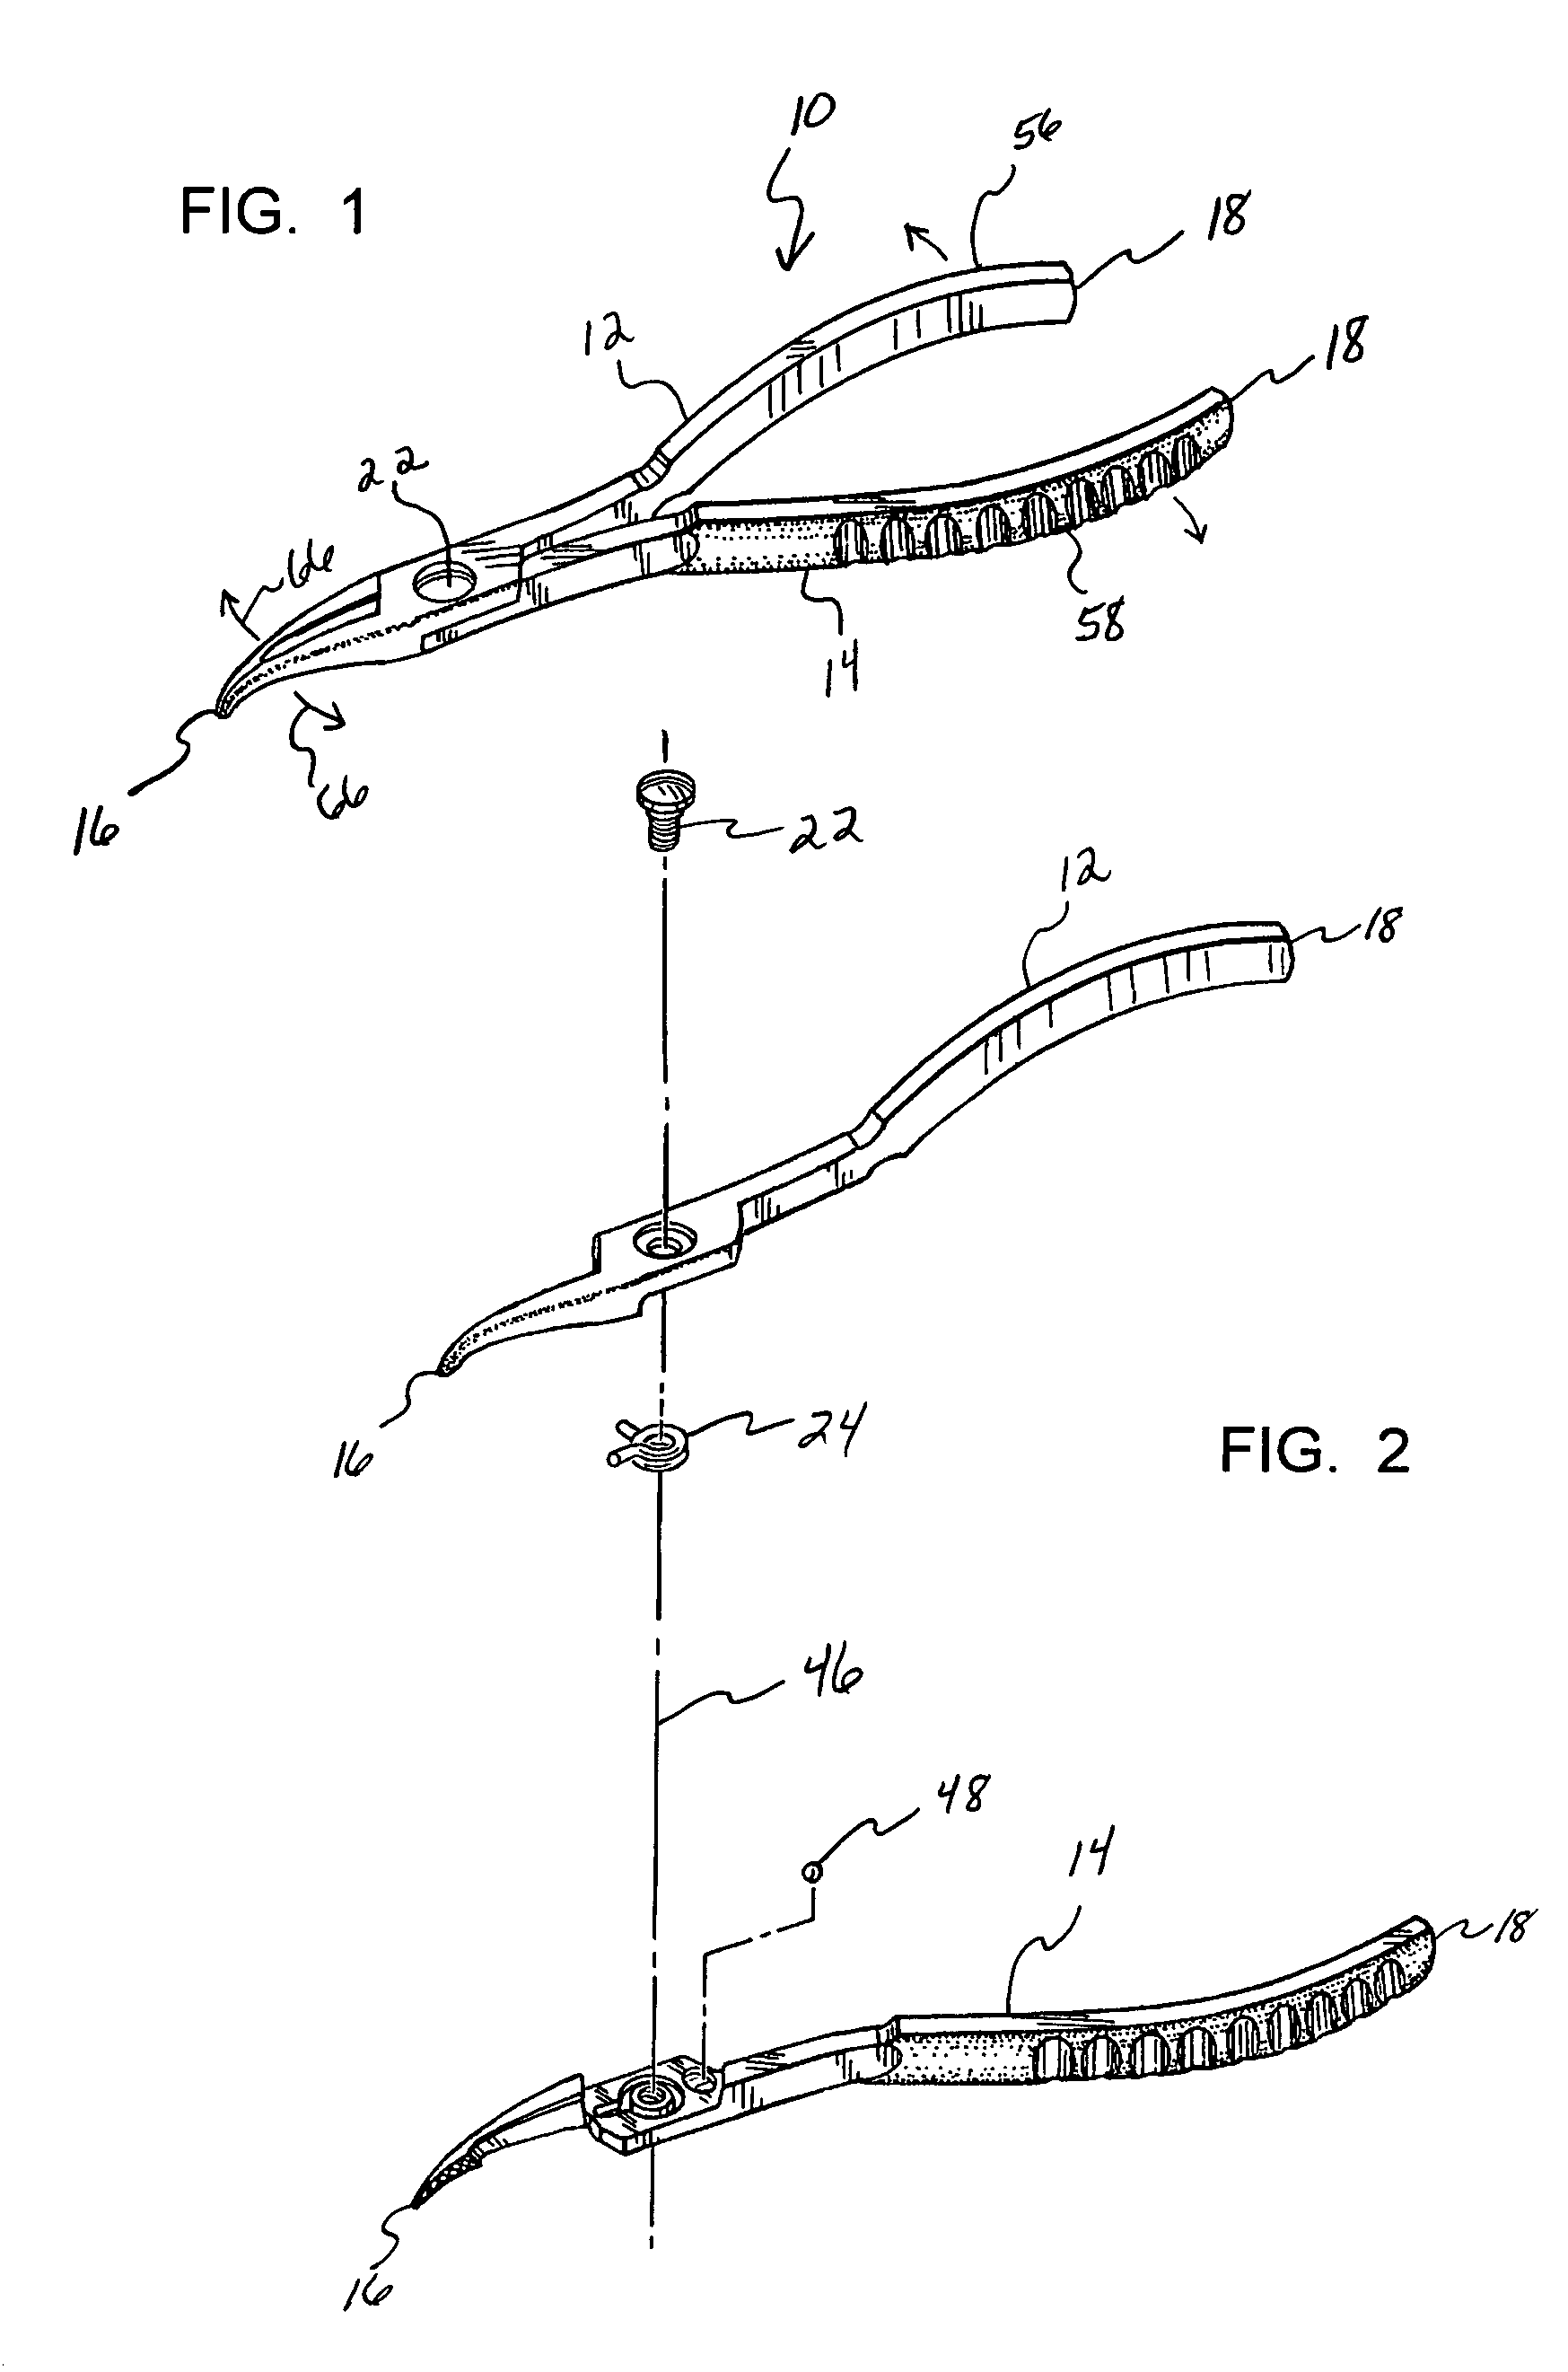 Orthodontic pliers and methods of using the same